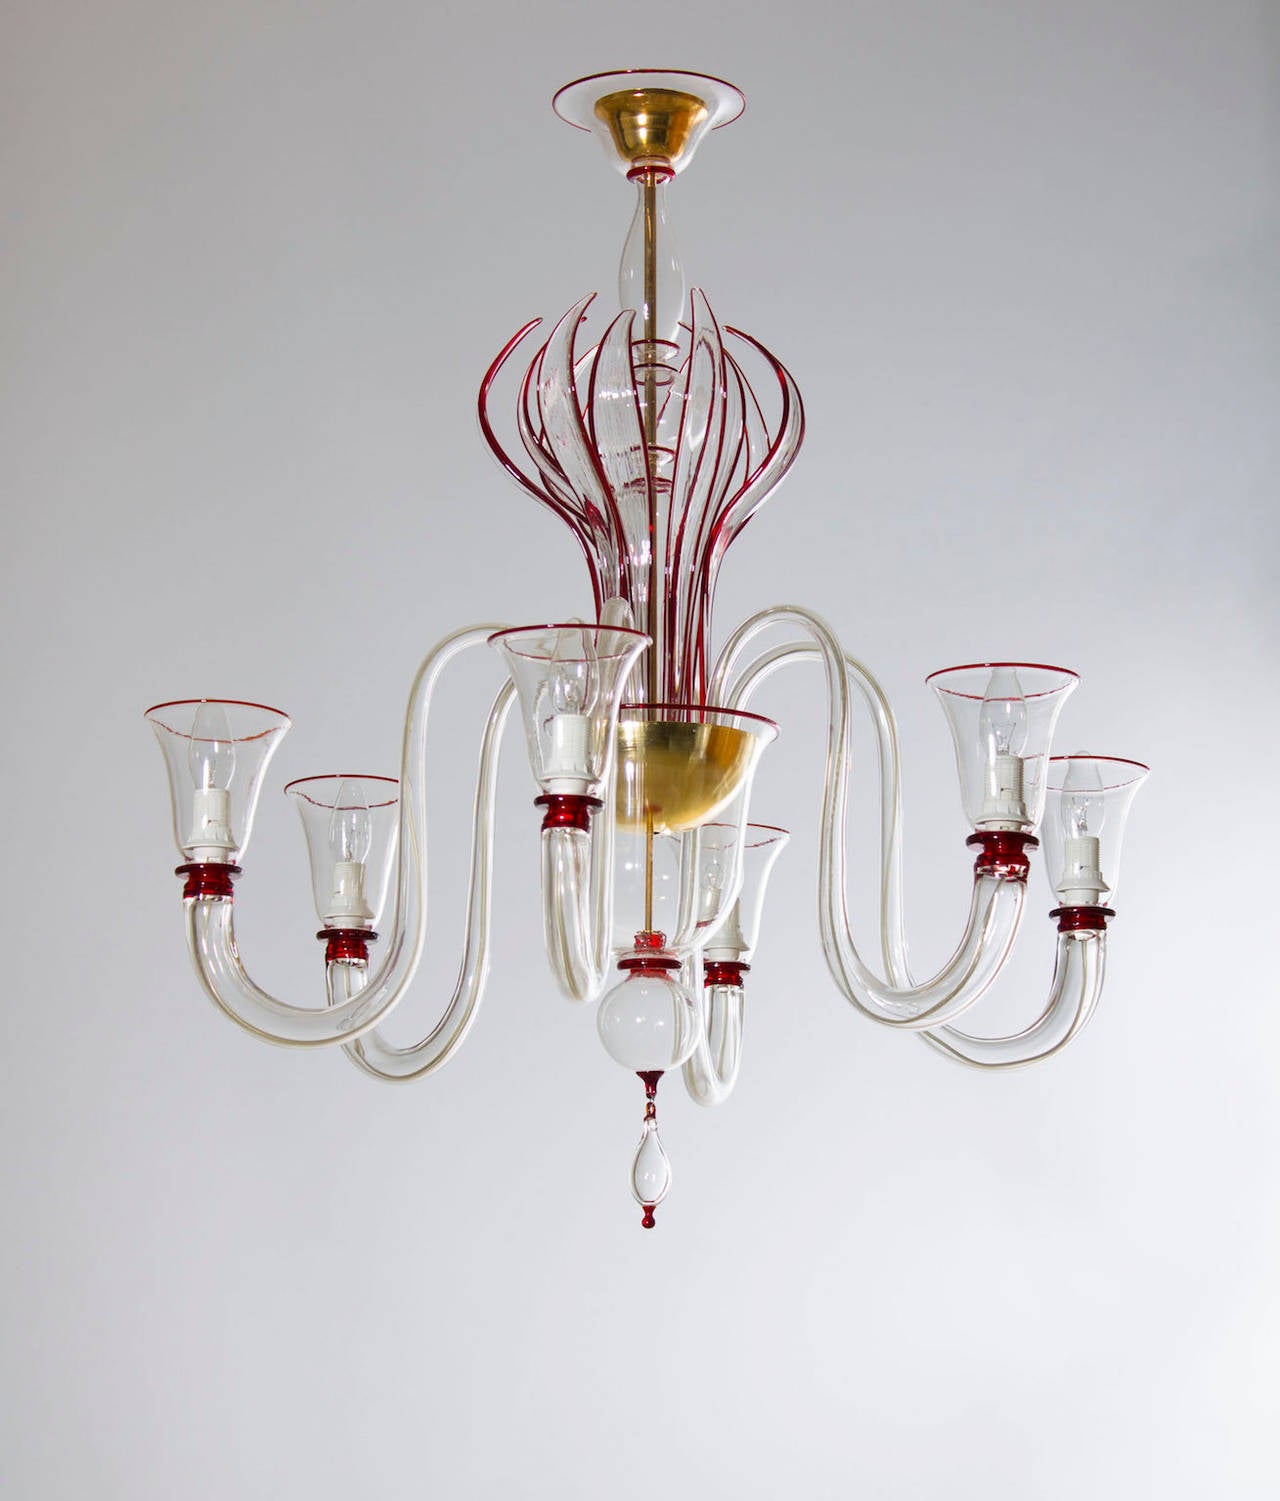 Amazing modern Italian Venetian chandelier, blown Murano glass transparent, red finiture.
The chandelier is handcrafted, by the Murano artists specialized in the art of the blown Murano Glass.
In excellent original conditions from 1990s, composed by